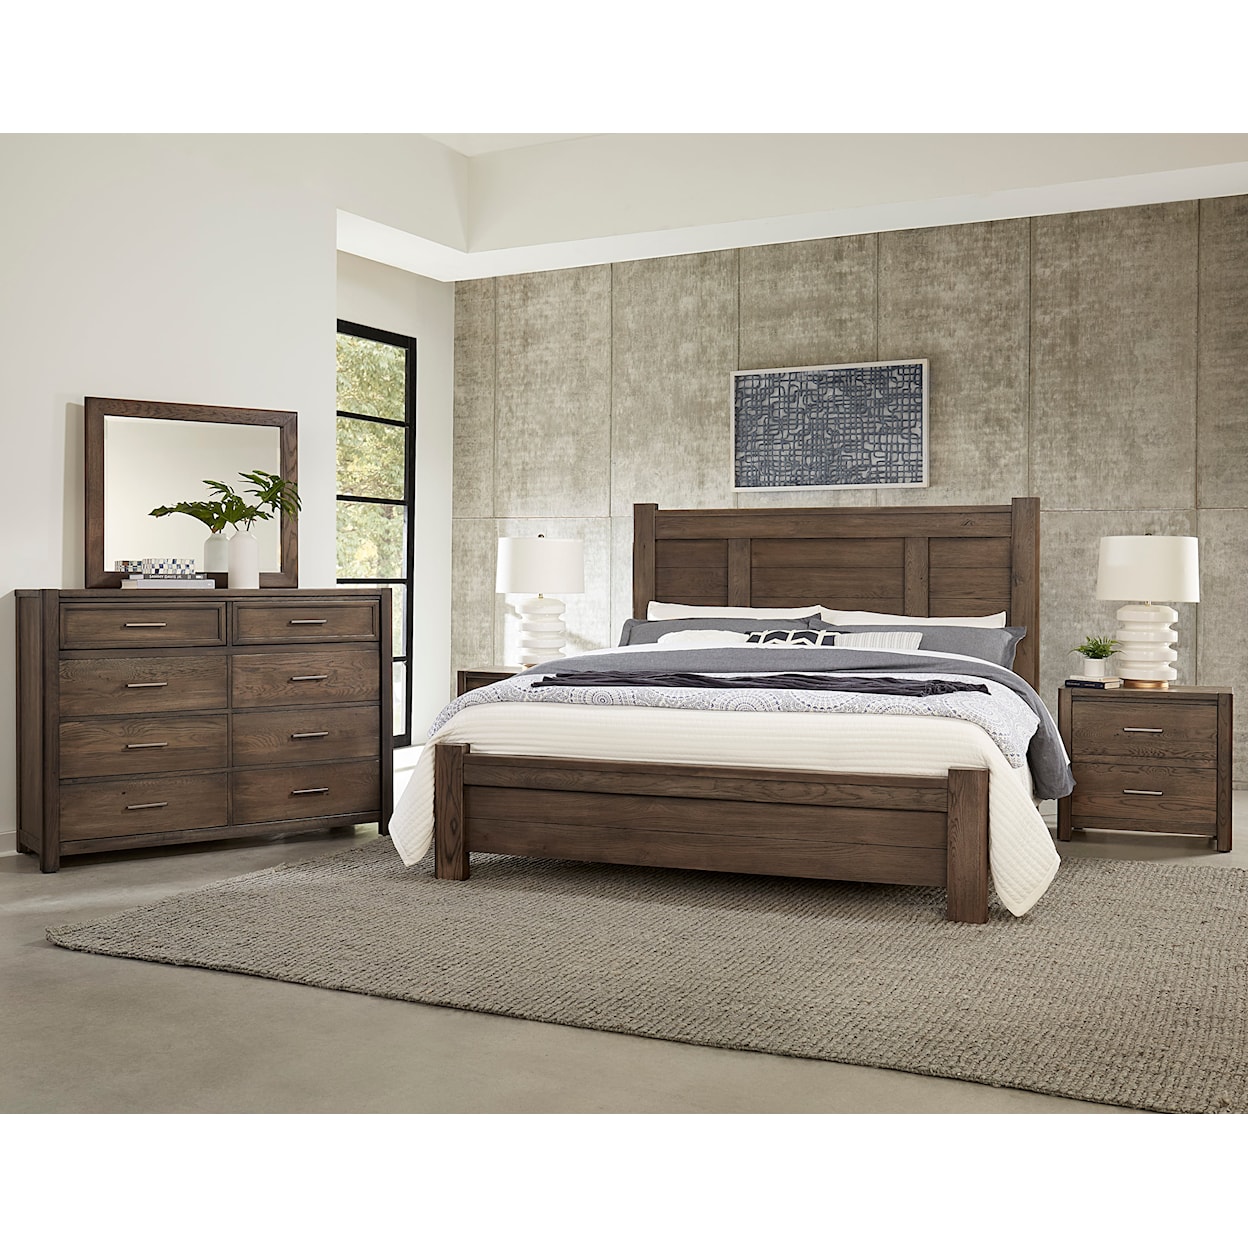 Vaughan Bassett Crafted Oak - Aged Grey California King Poster Bed